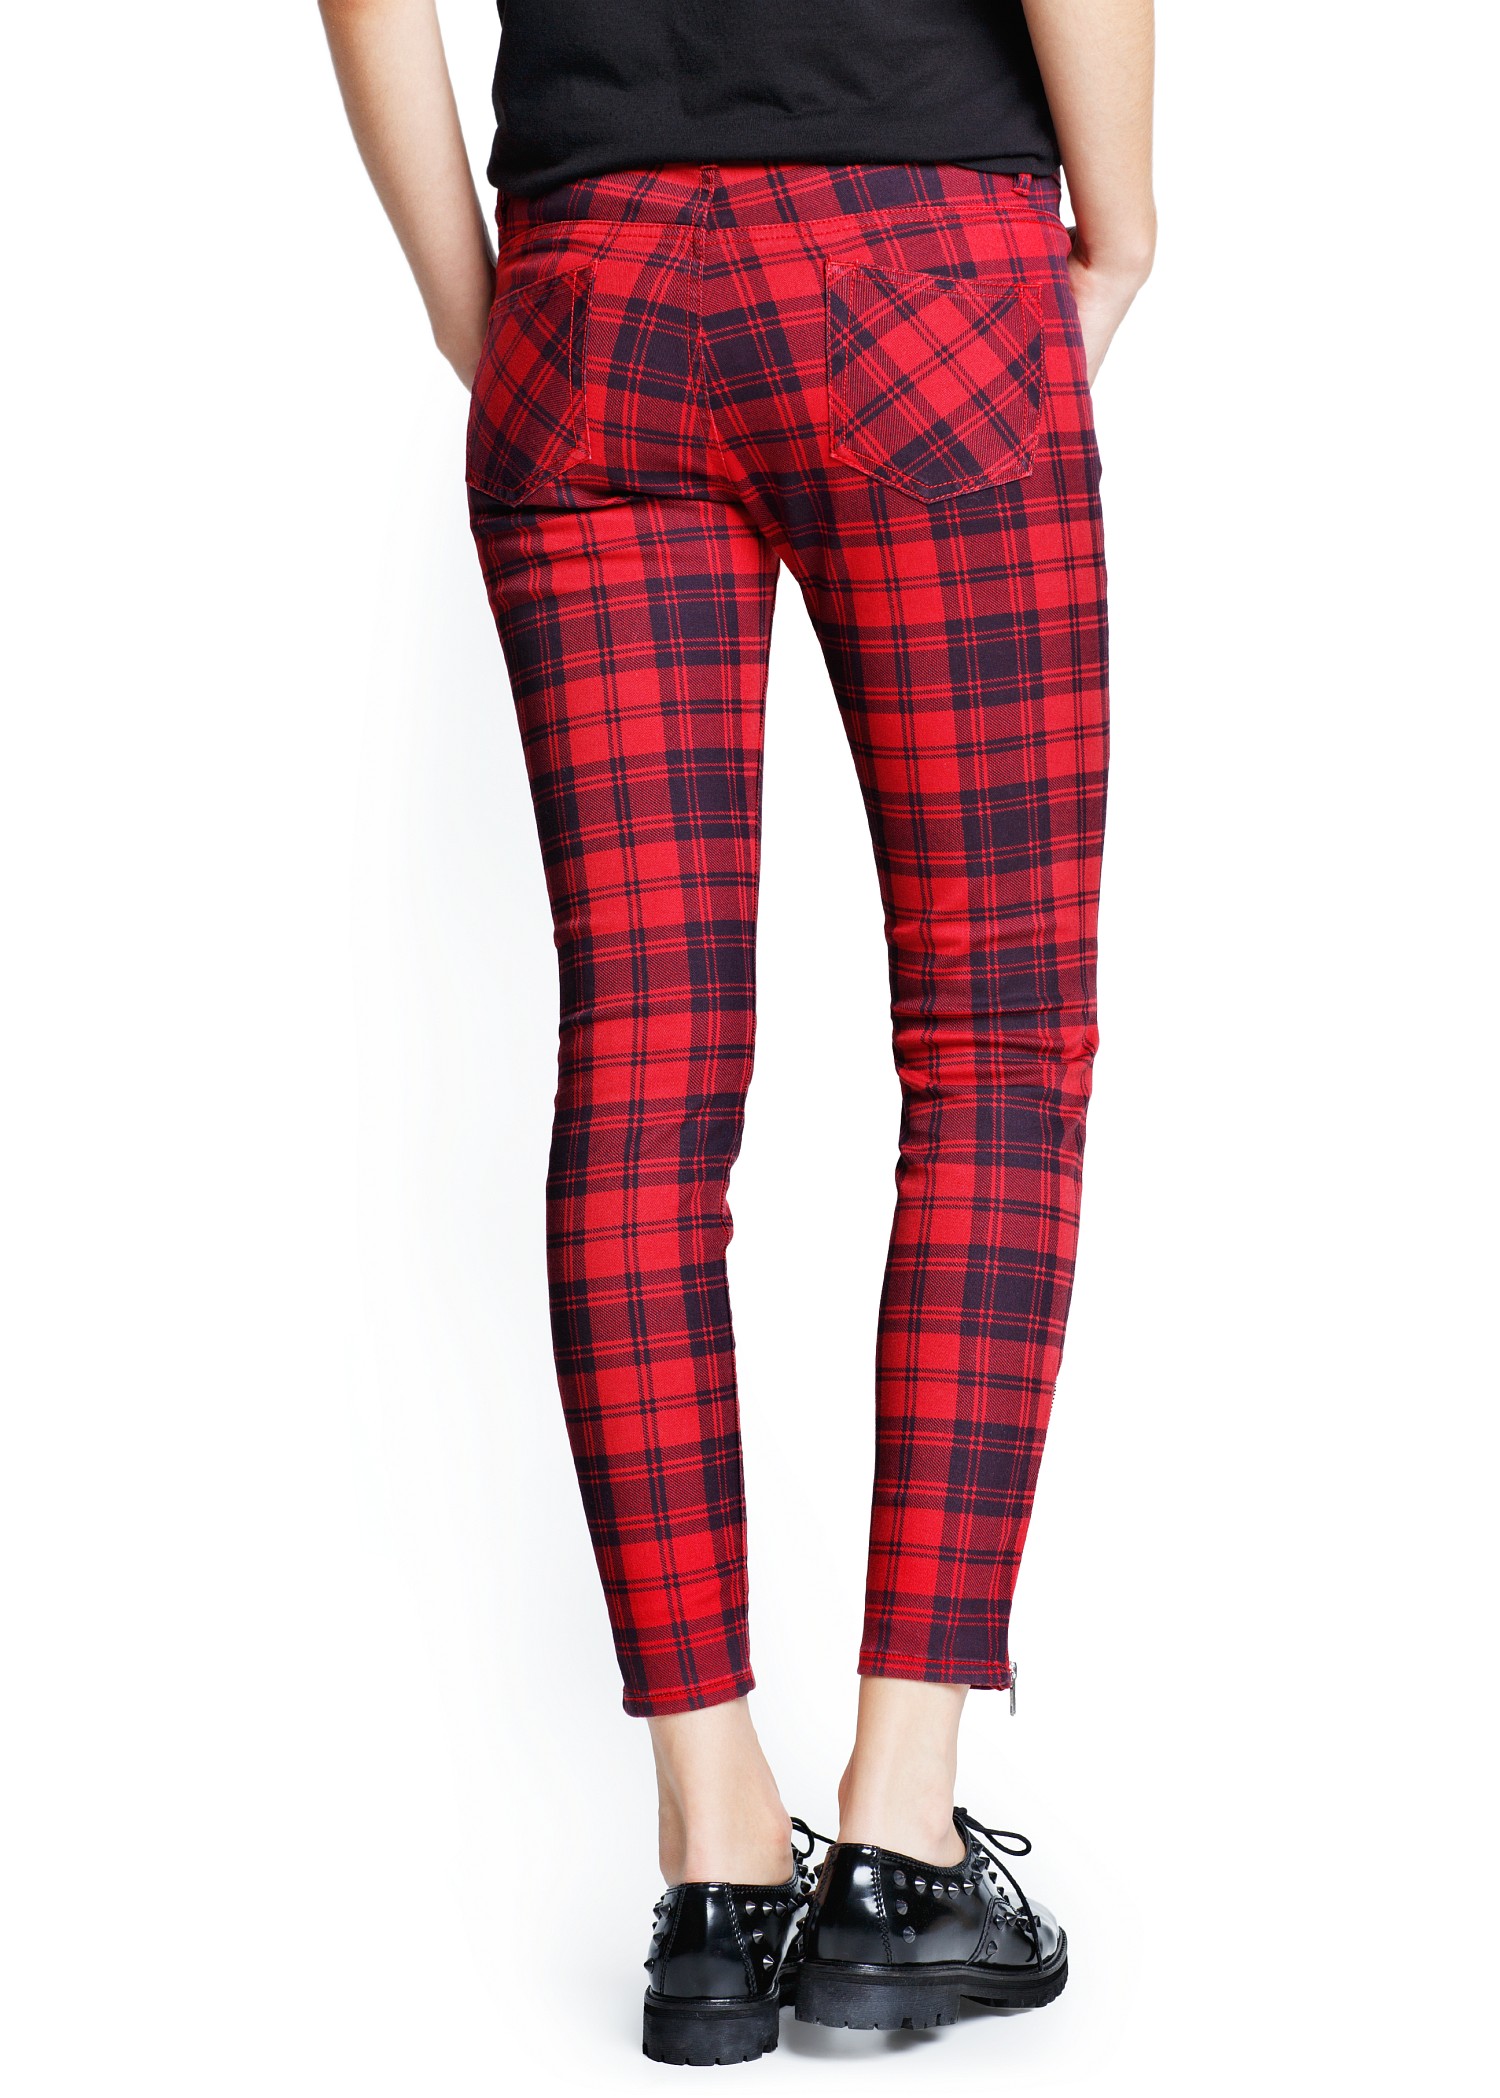 Lyst - Mango Plaid Trousers in Red